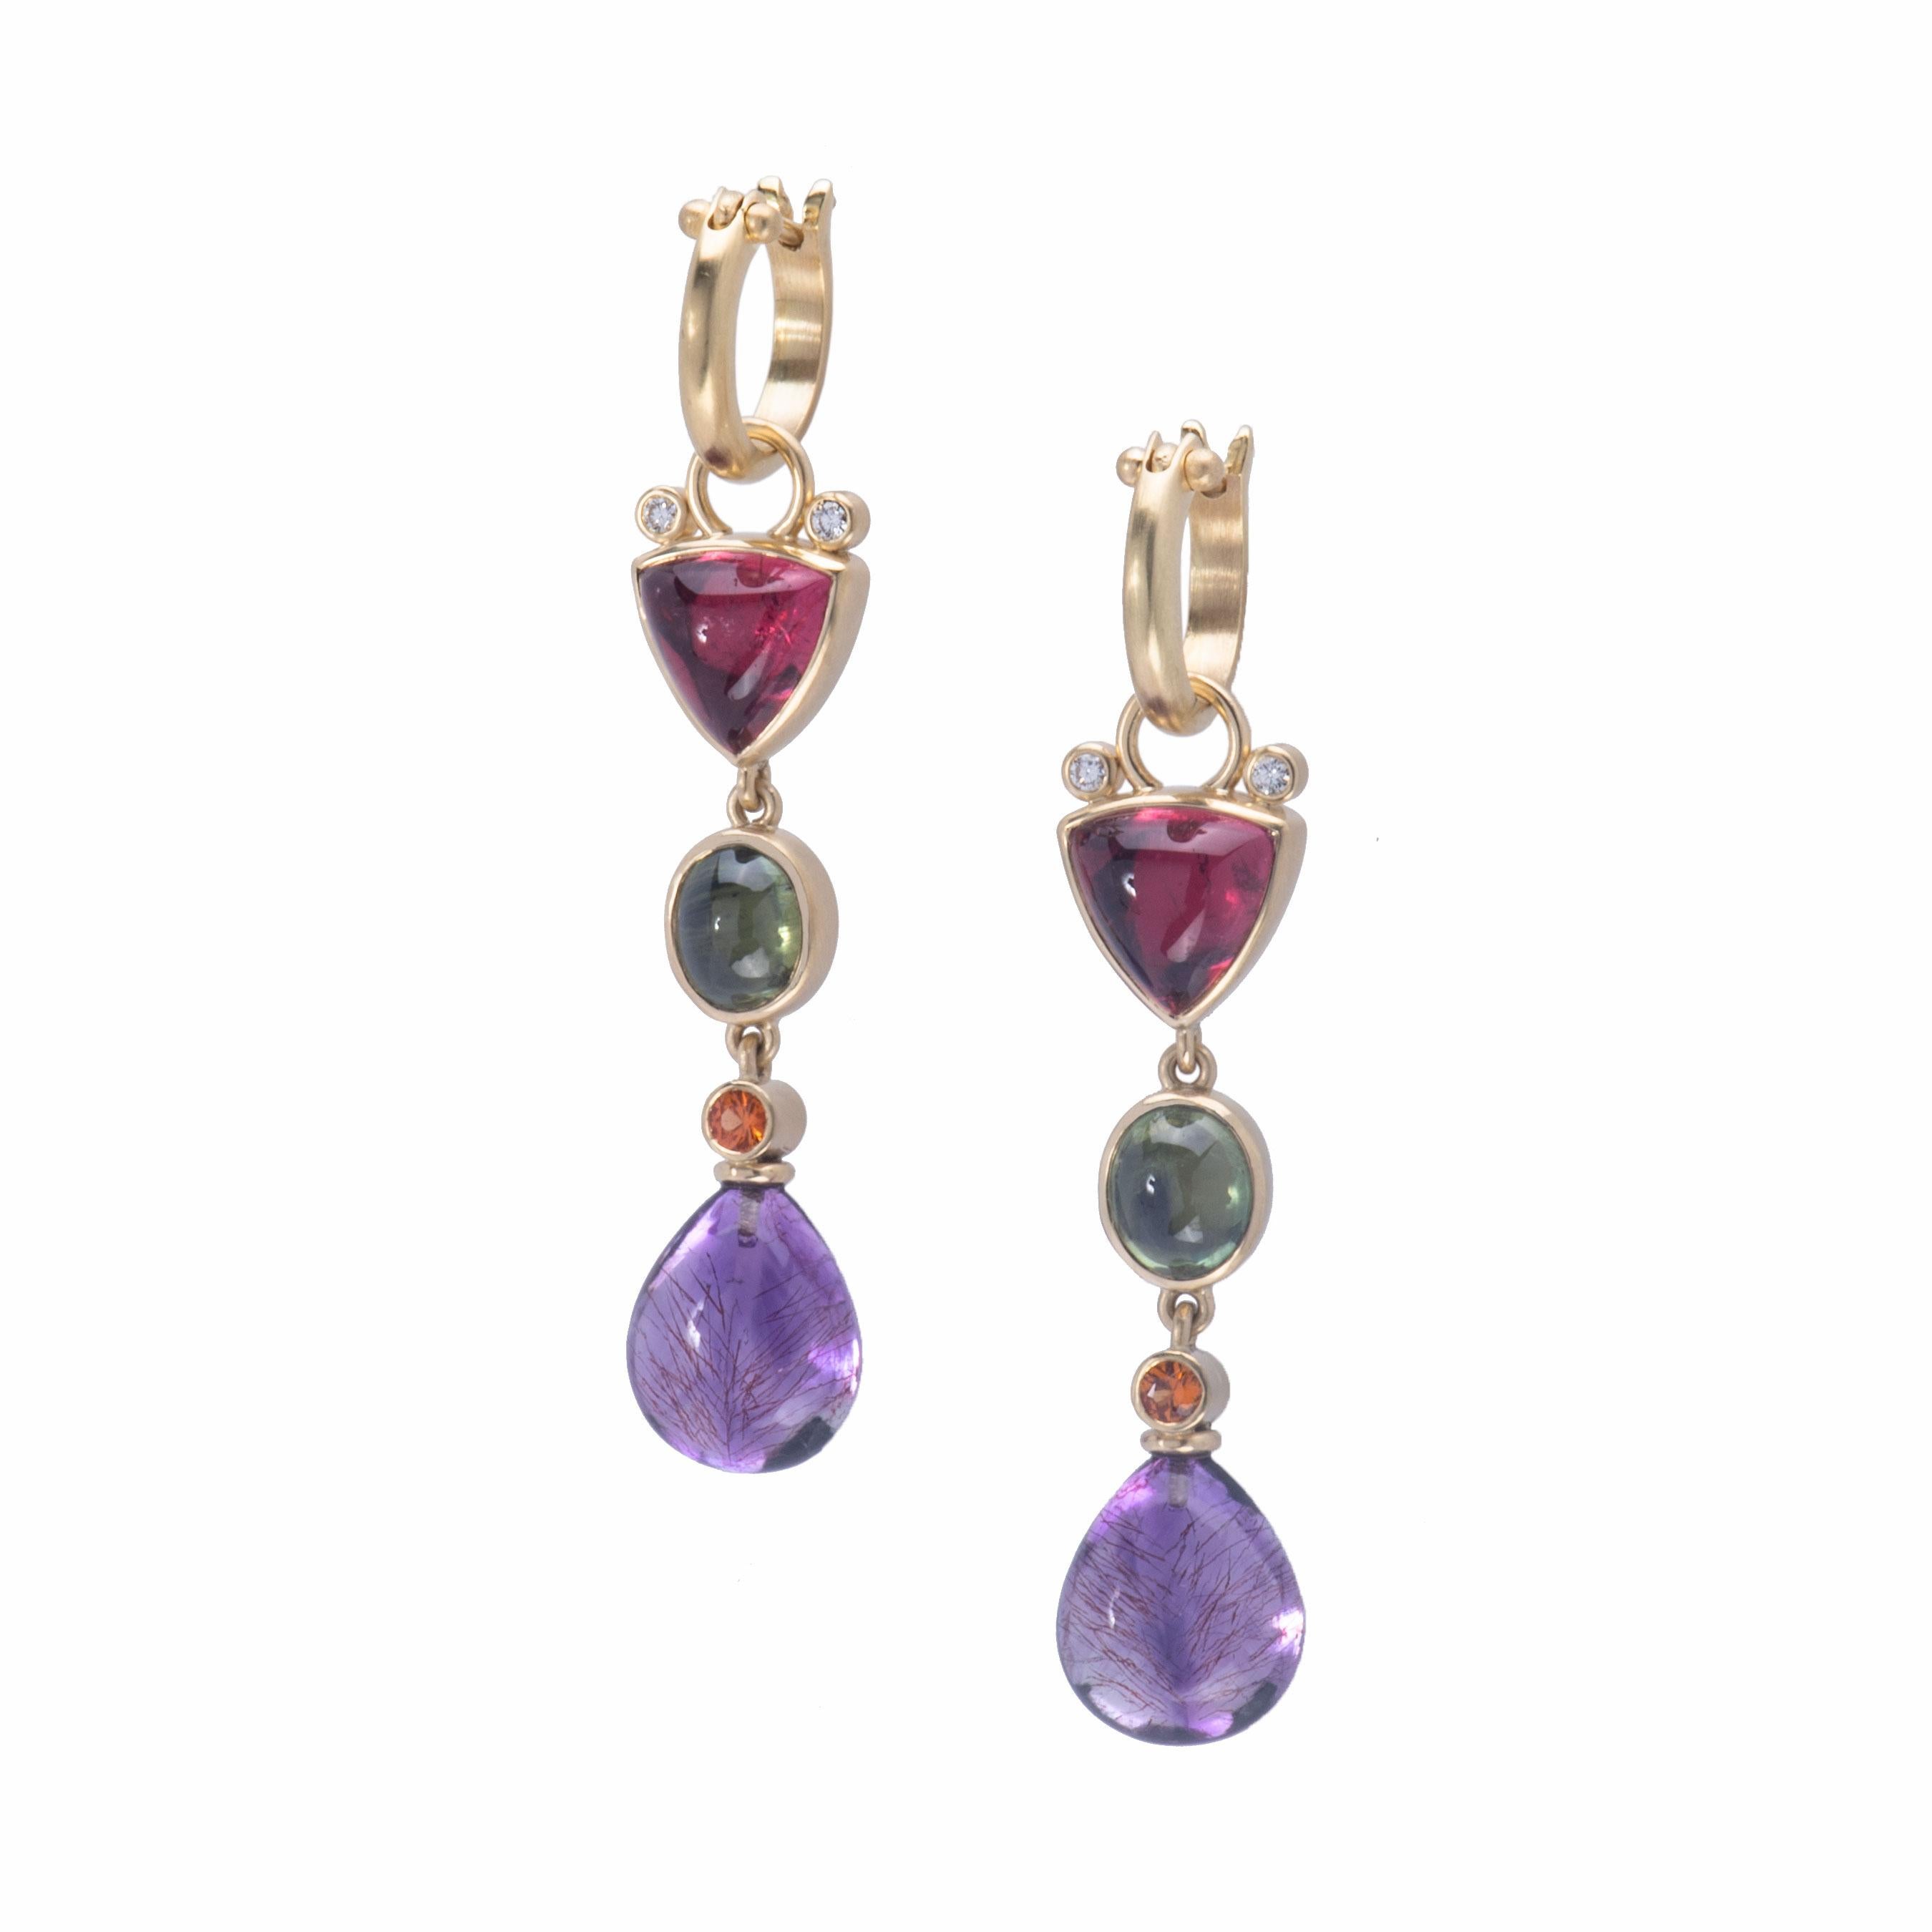 Rubellite tourmaline 6.23tcw cabochons top these earrings and are accented with pair of white diamonds. Kiwi-colored 3.41tcw green sapphires are centered and deep 14.95tcw amethyst briolettes are topped with mango colored sapphires. These earrings